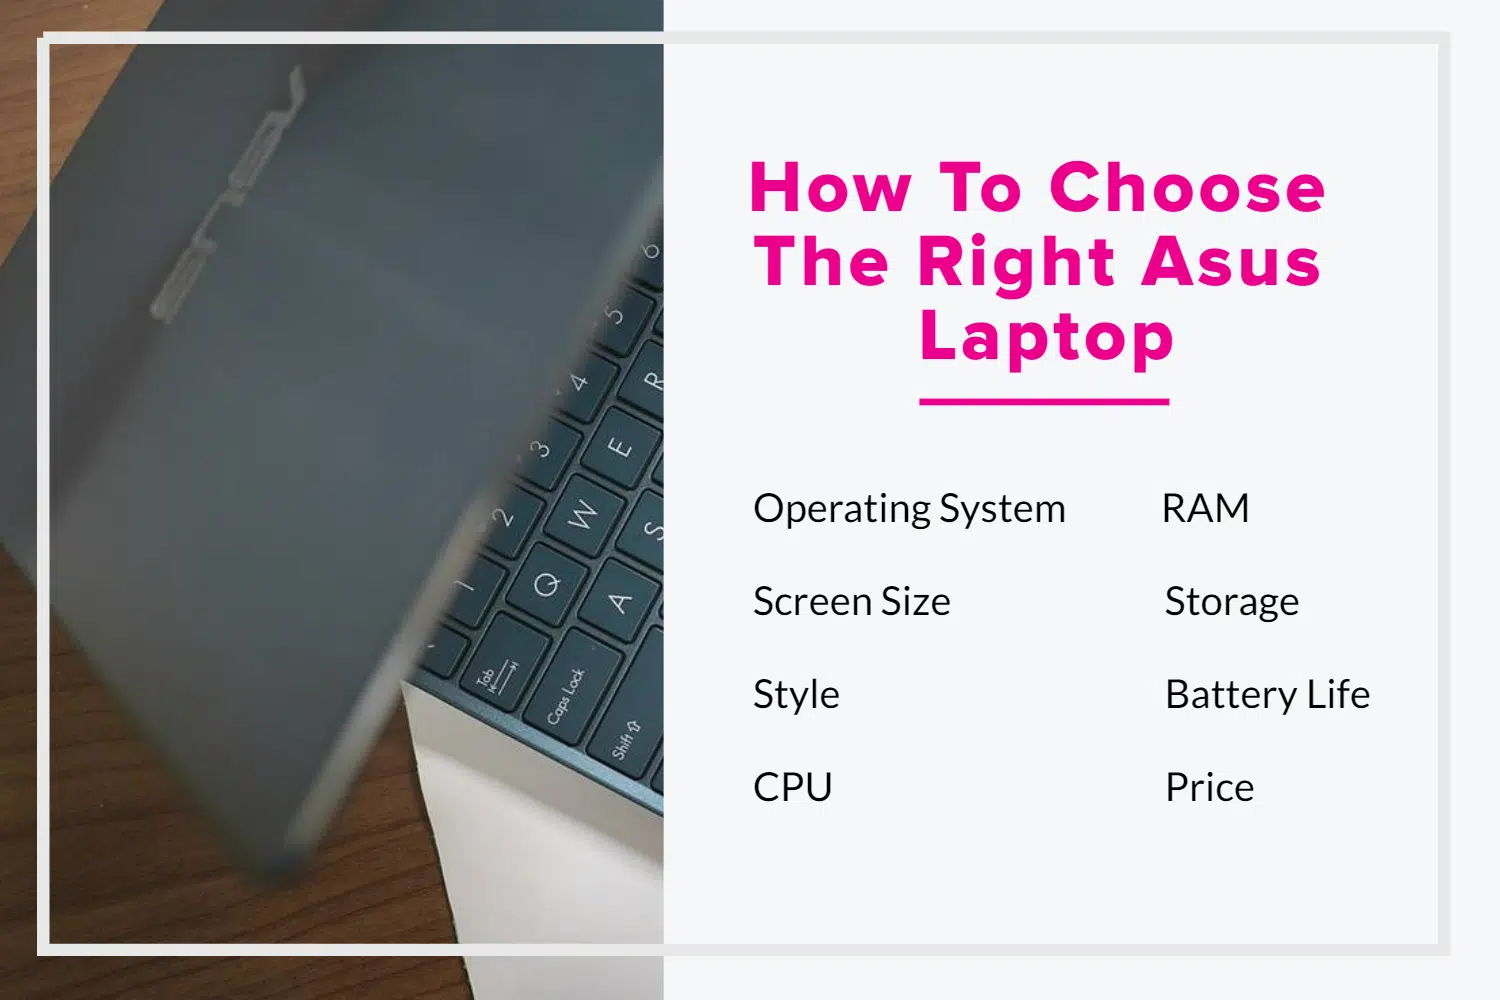 How To Choose The Right Asus Laptop